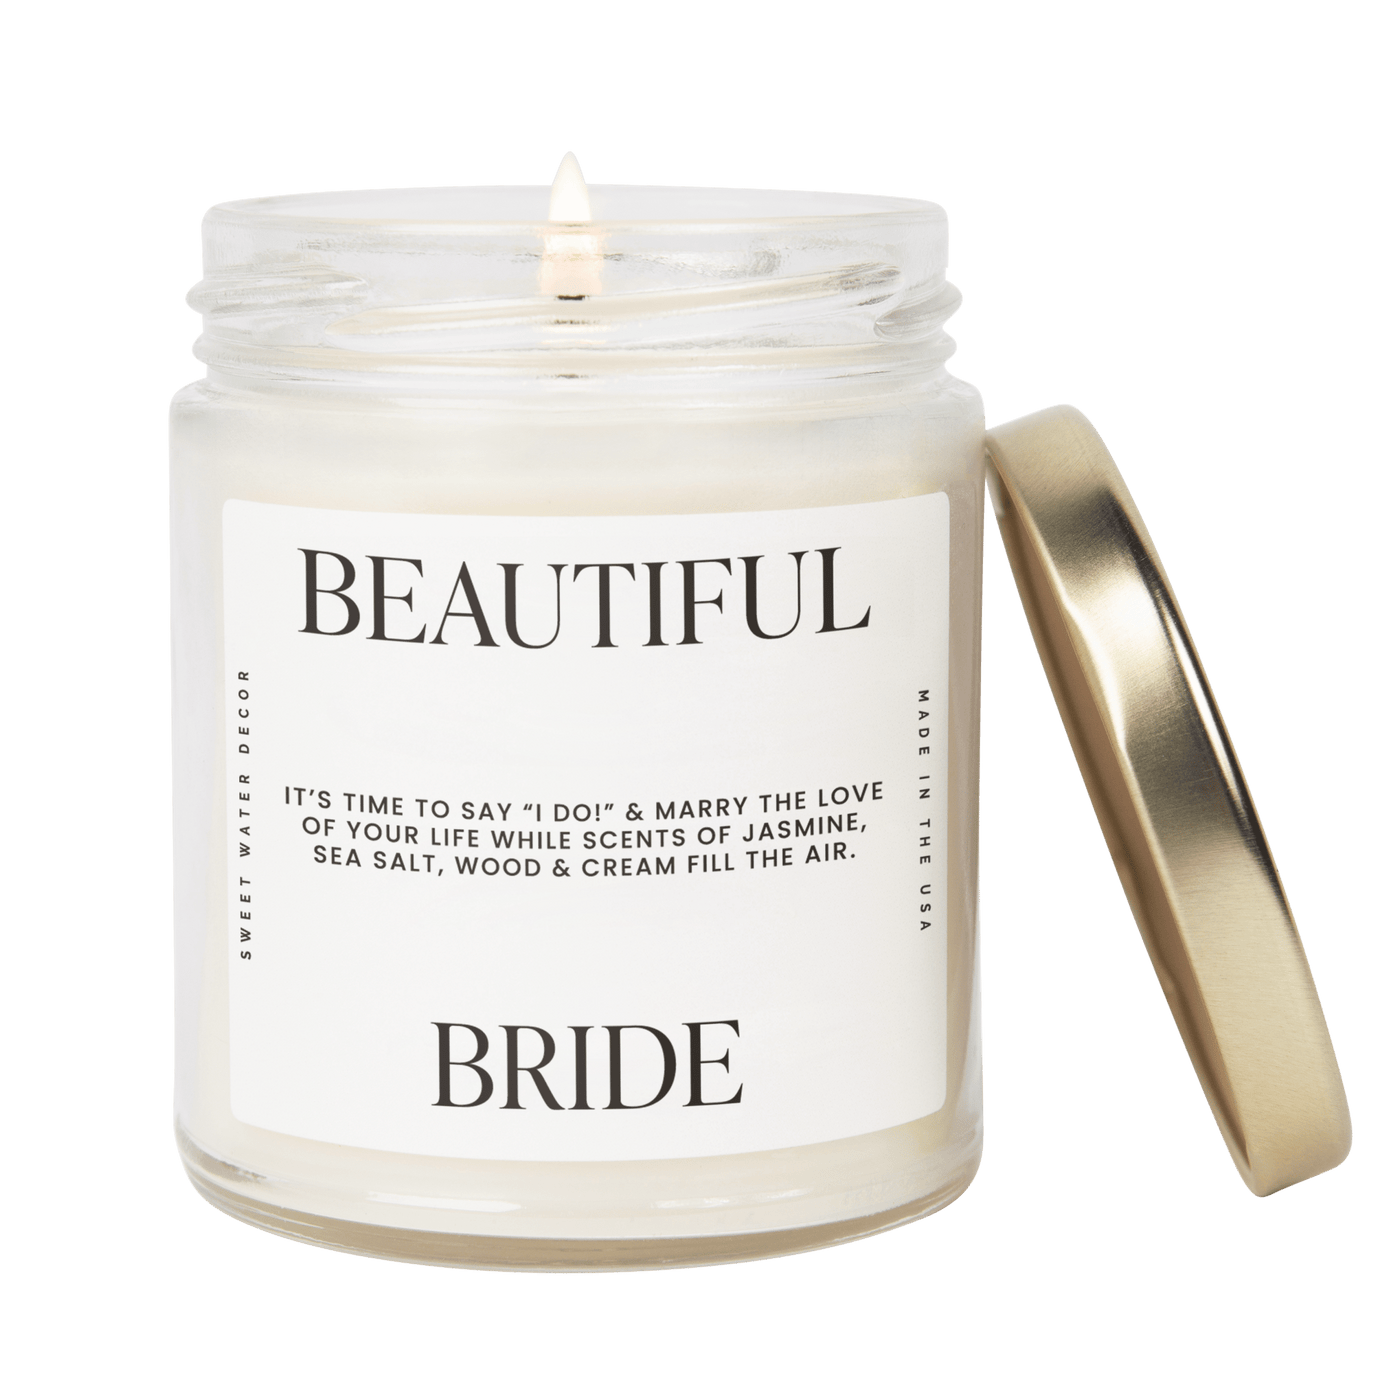 Beautiful Bride Soy Candle - Large Quote Label - 9 oz - Sweet Water Decor - Candles